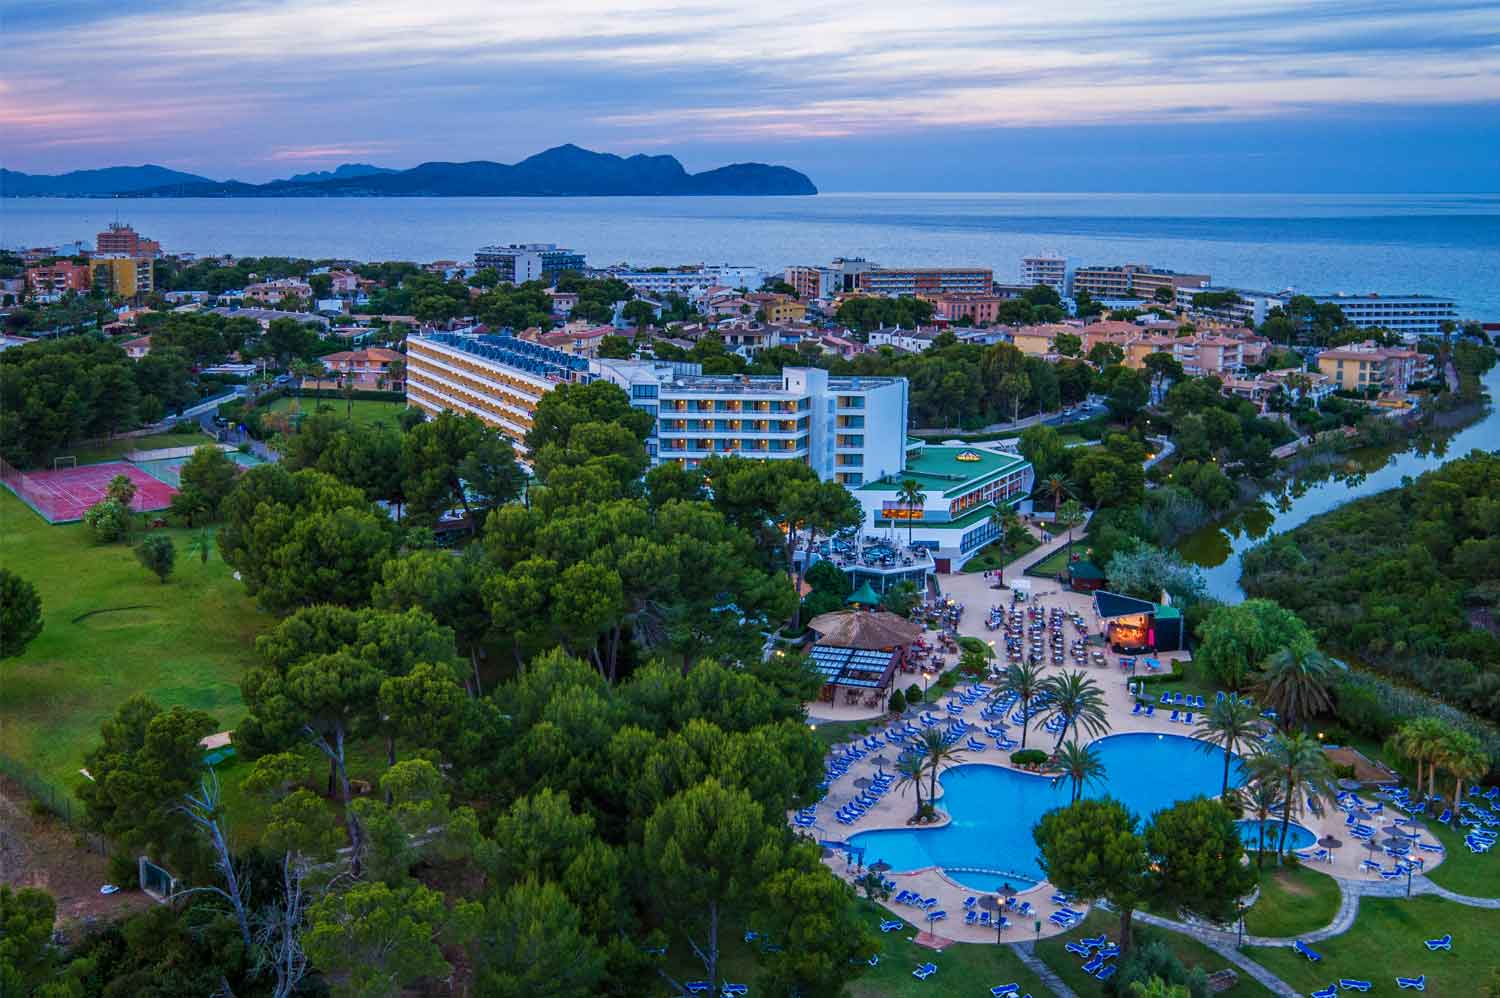 Hotel Exagon Park connects with Dingus® in Mallorca